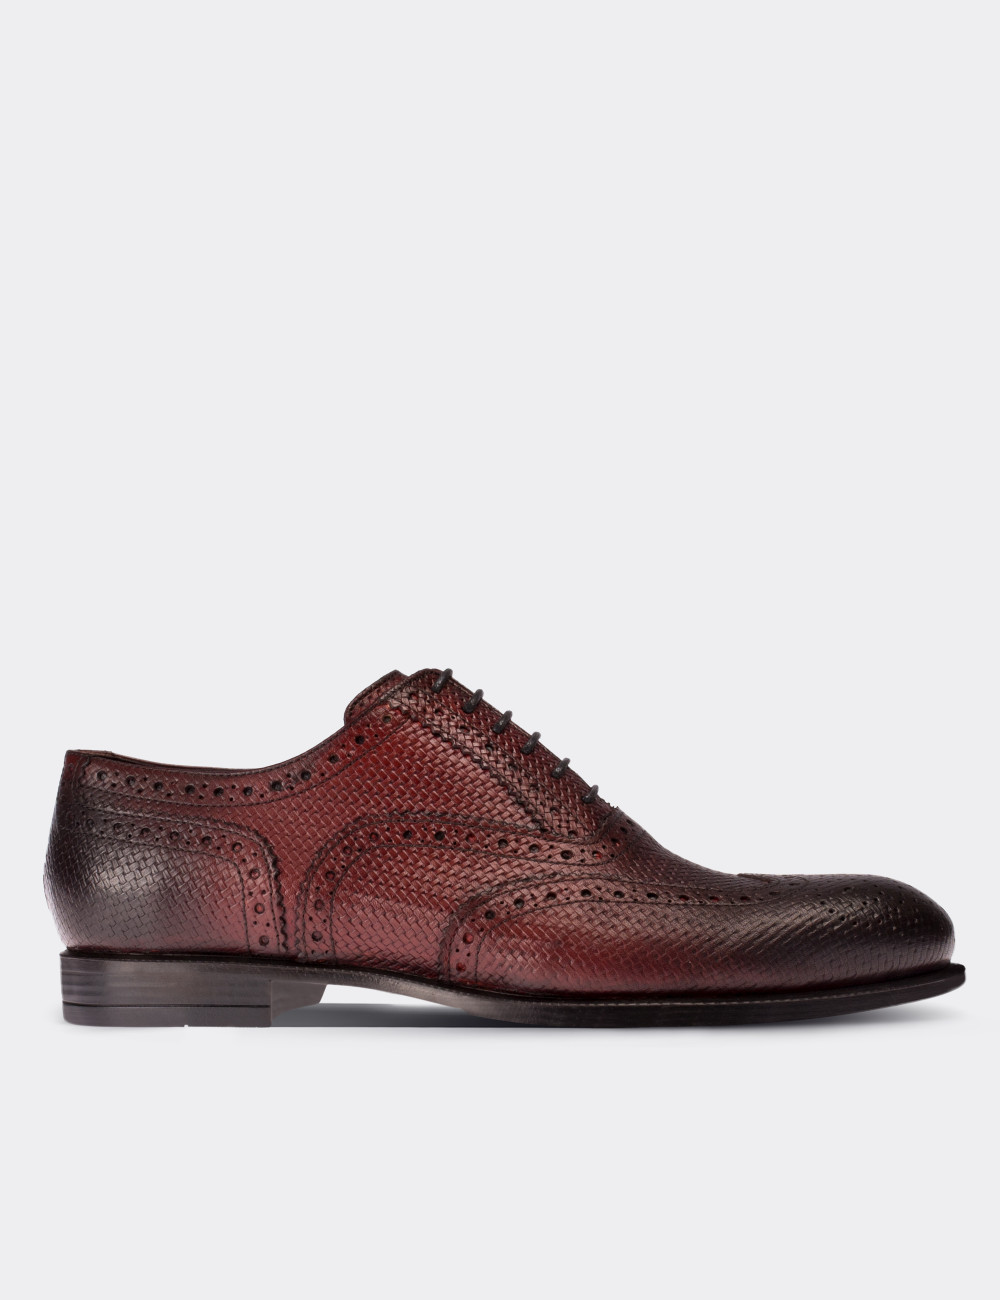 Burgundy  Leather Classic Shoes - 01182MBRDC02